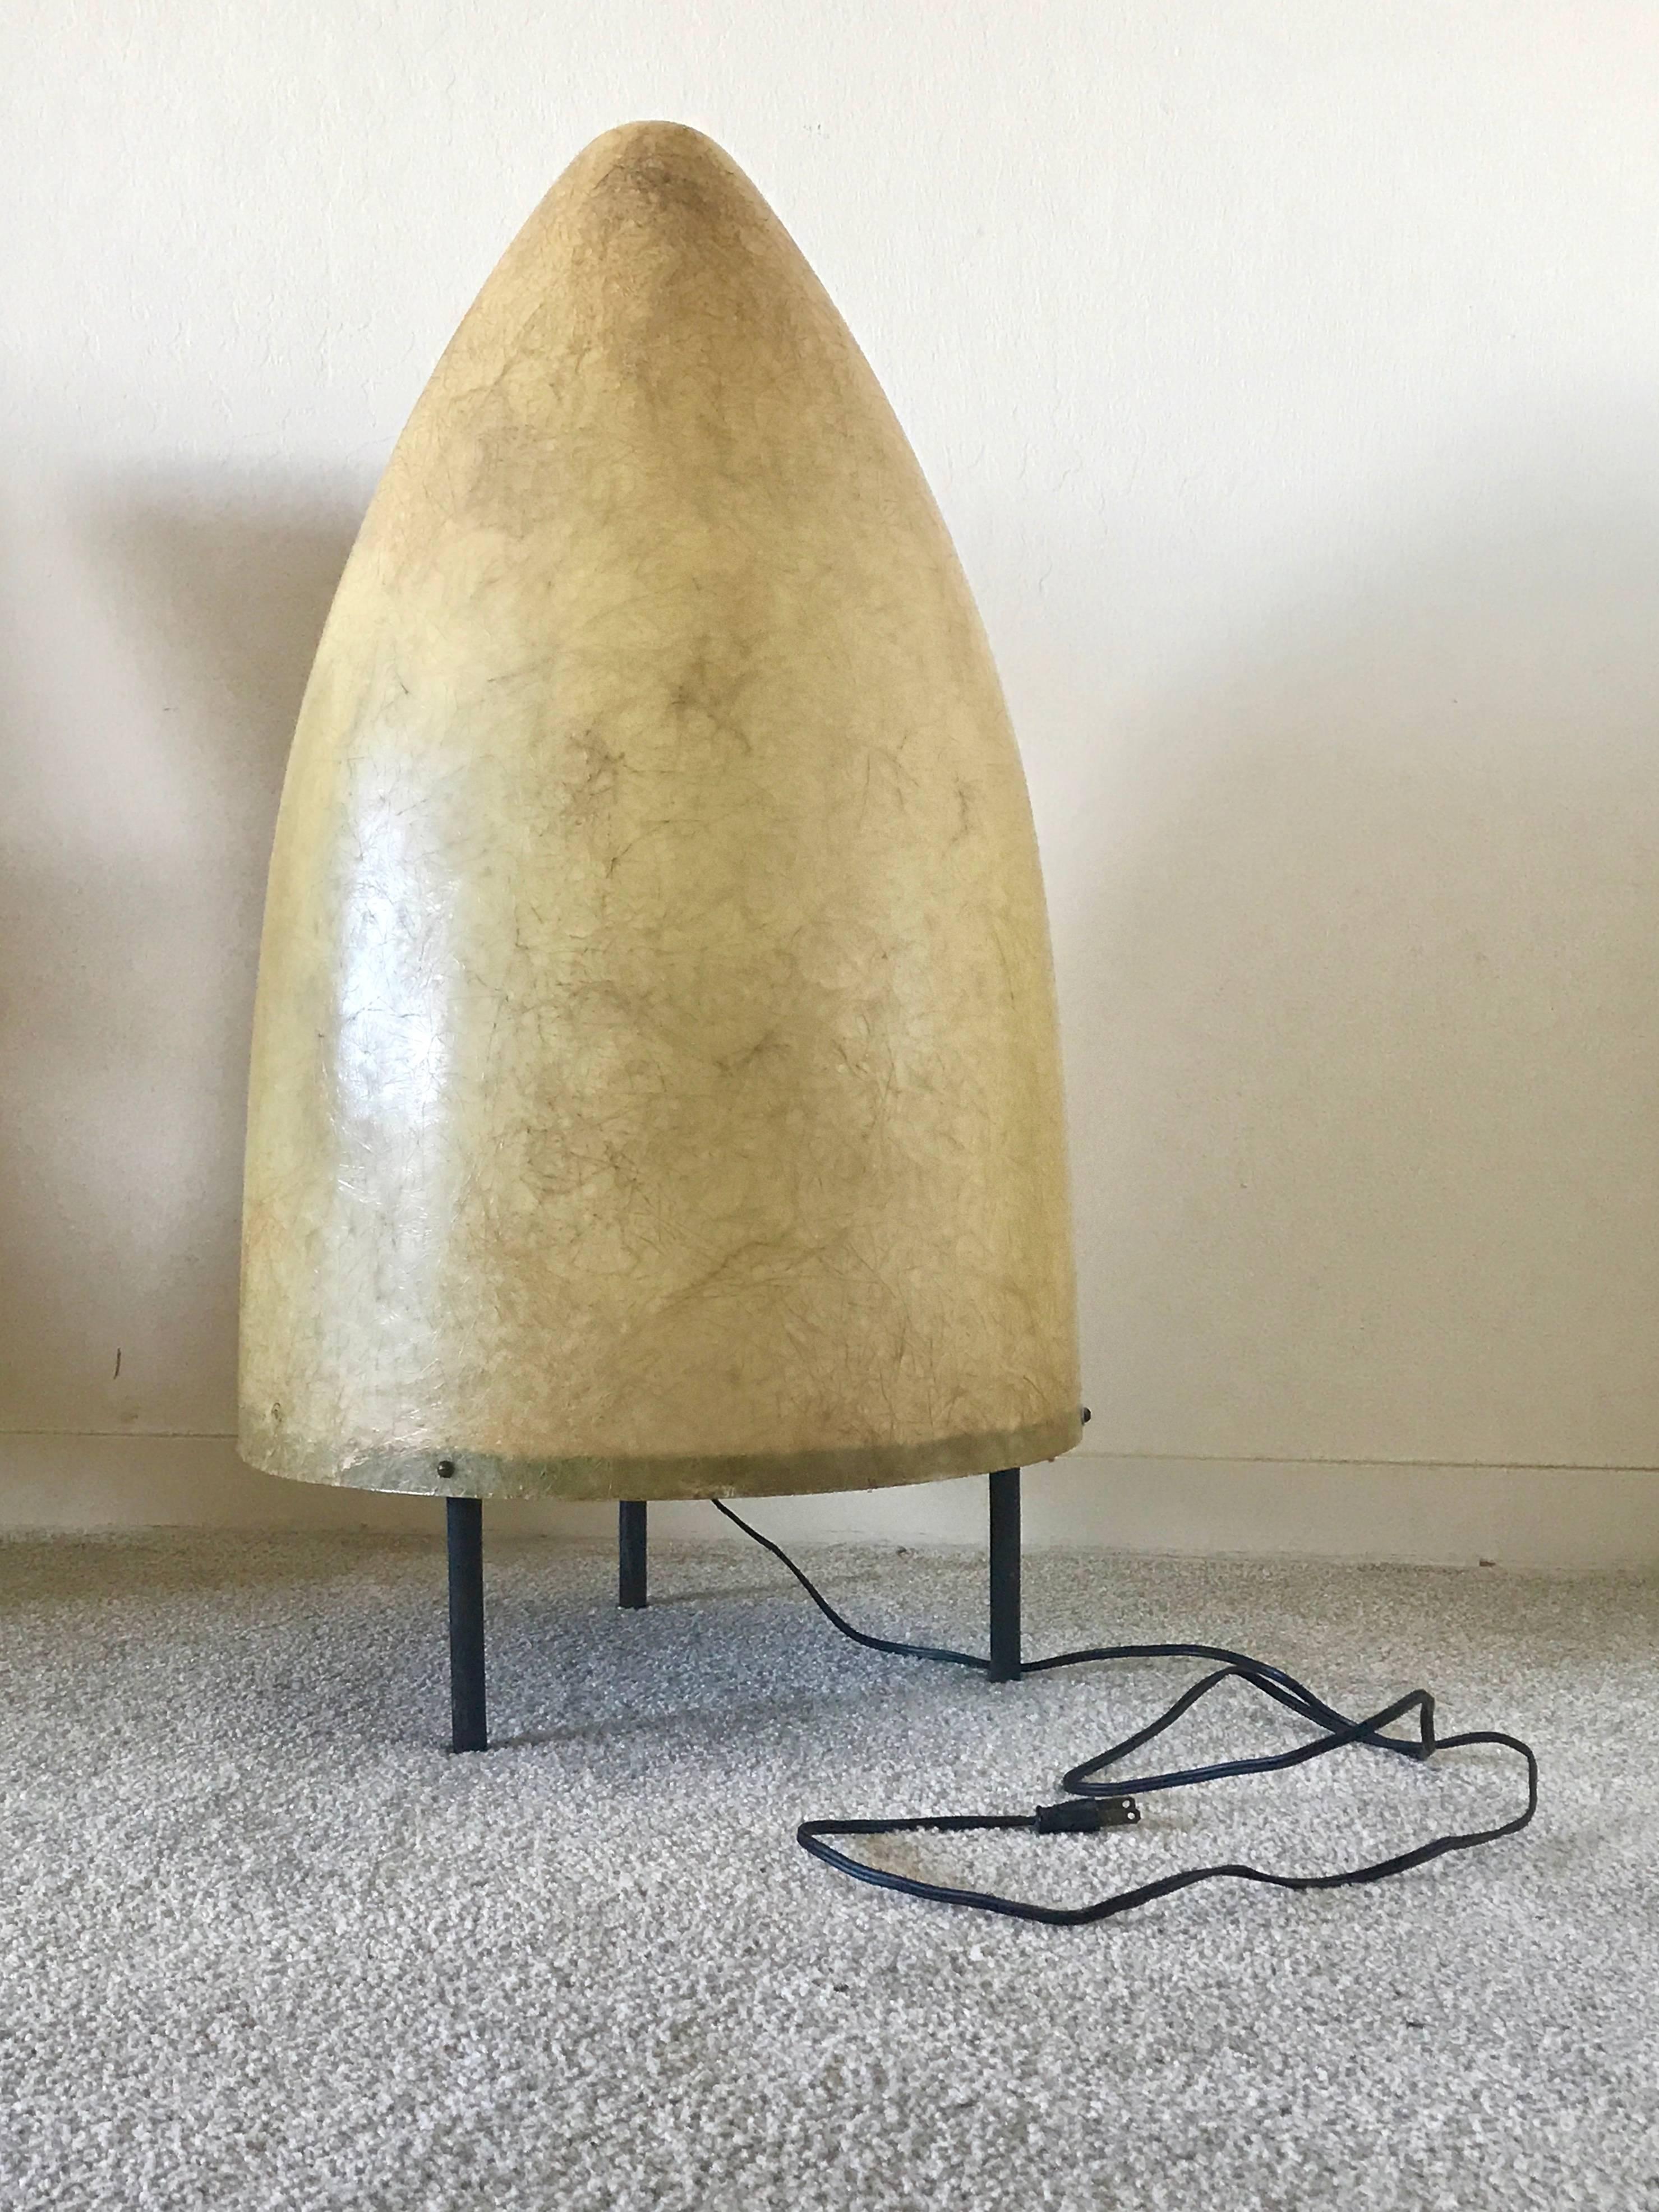 An creative use of Industrial Design materials for lighting from the early 1950s is this lamp constructed from a fiberglass cone and attached to a painted wooden tripod base. The fixture can be used either as a floor lamp or a large scale table